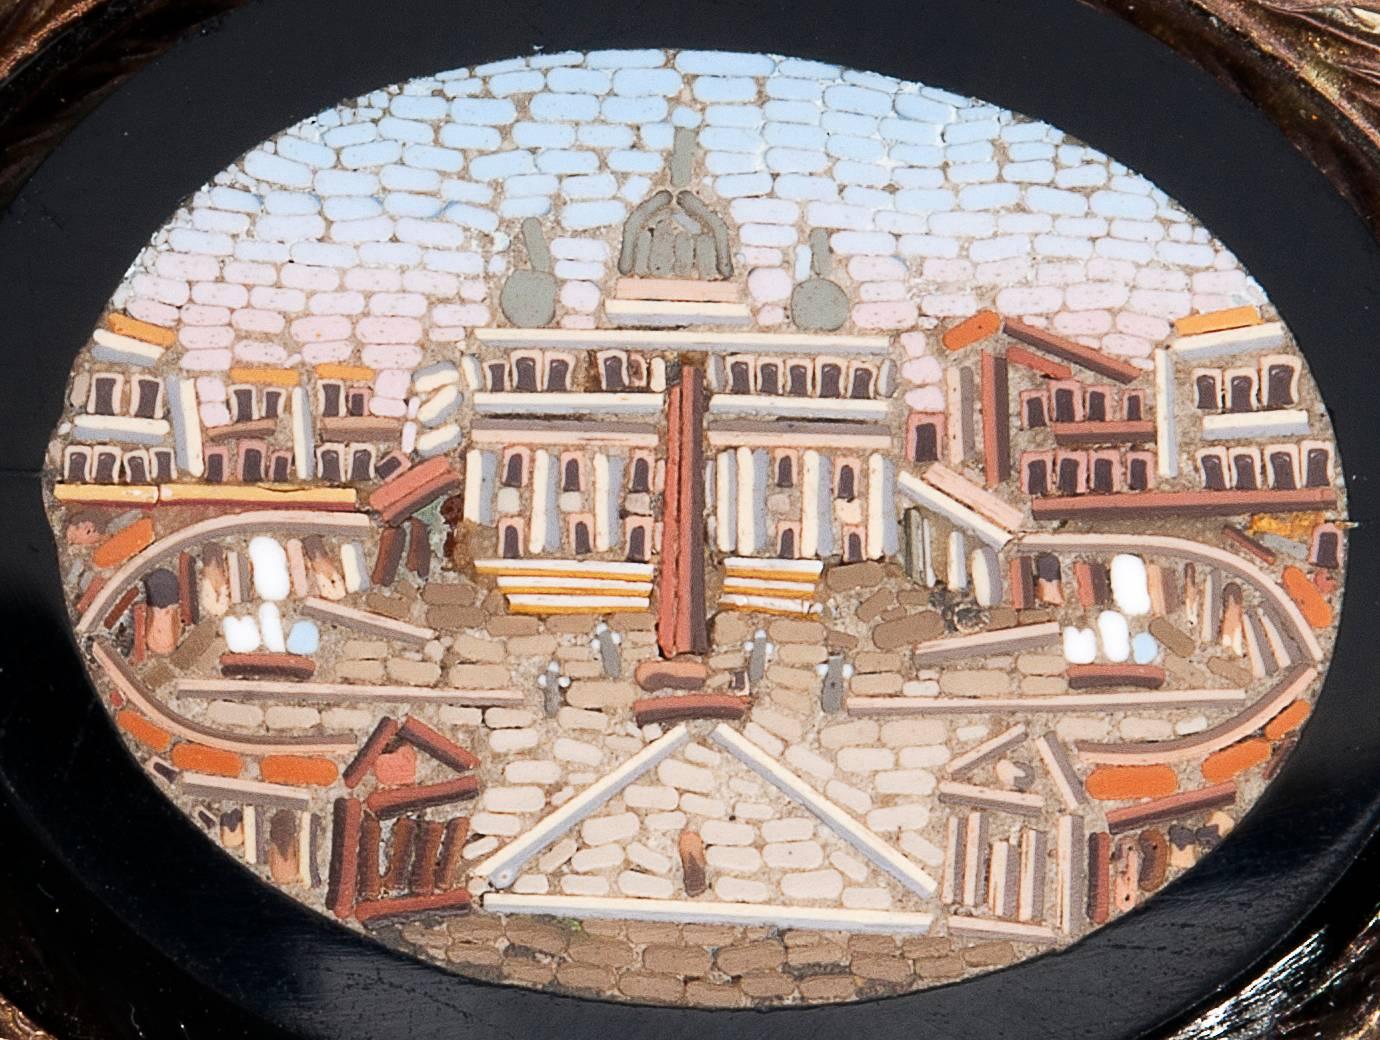 Micro-mosaic depicting St. Peter's Square set into a back glass plaque. Later gold mounting with Italian assay mark 750. Brooch face 38.4 x 44.6 mm. Weight 32.7 gr. Small tesserae of glass.  
Item condition grading: **** good - Ce.S.Ar.